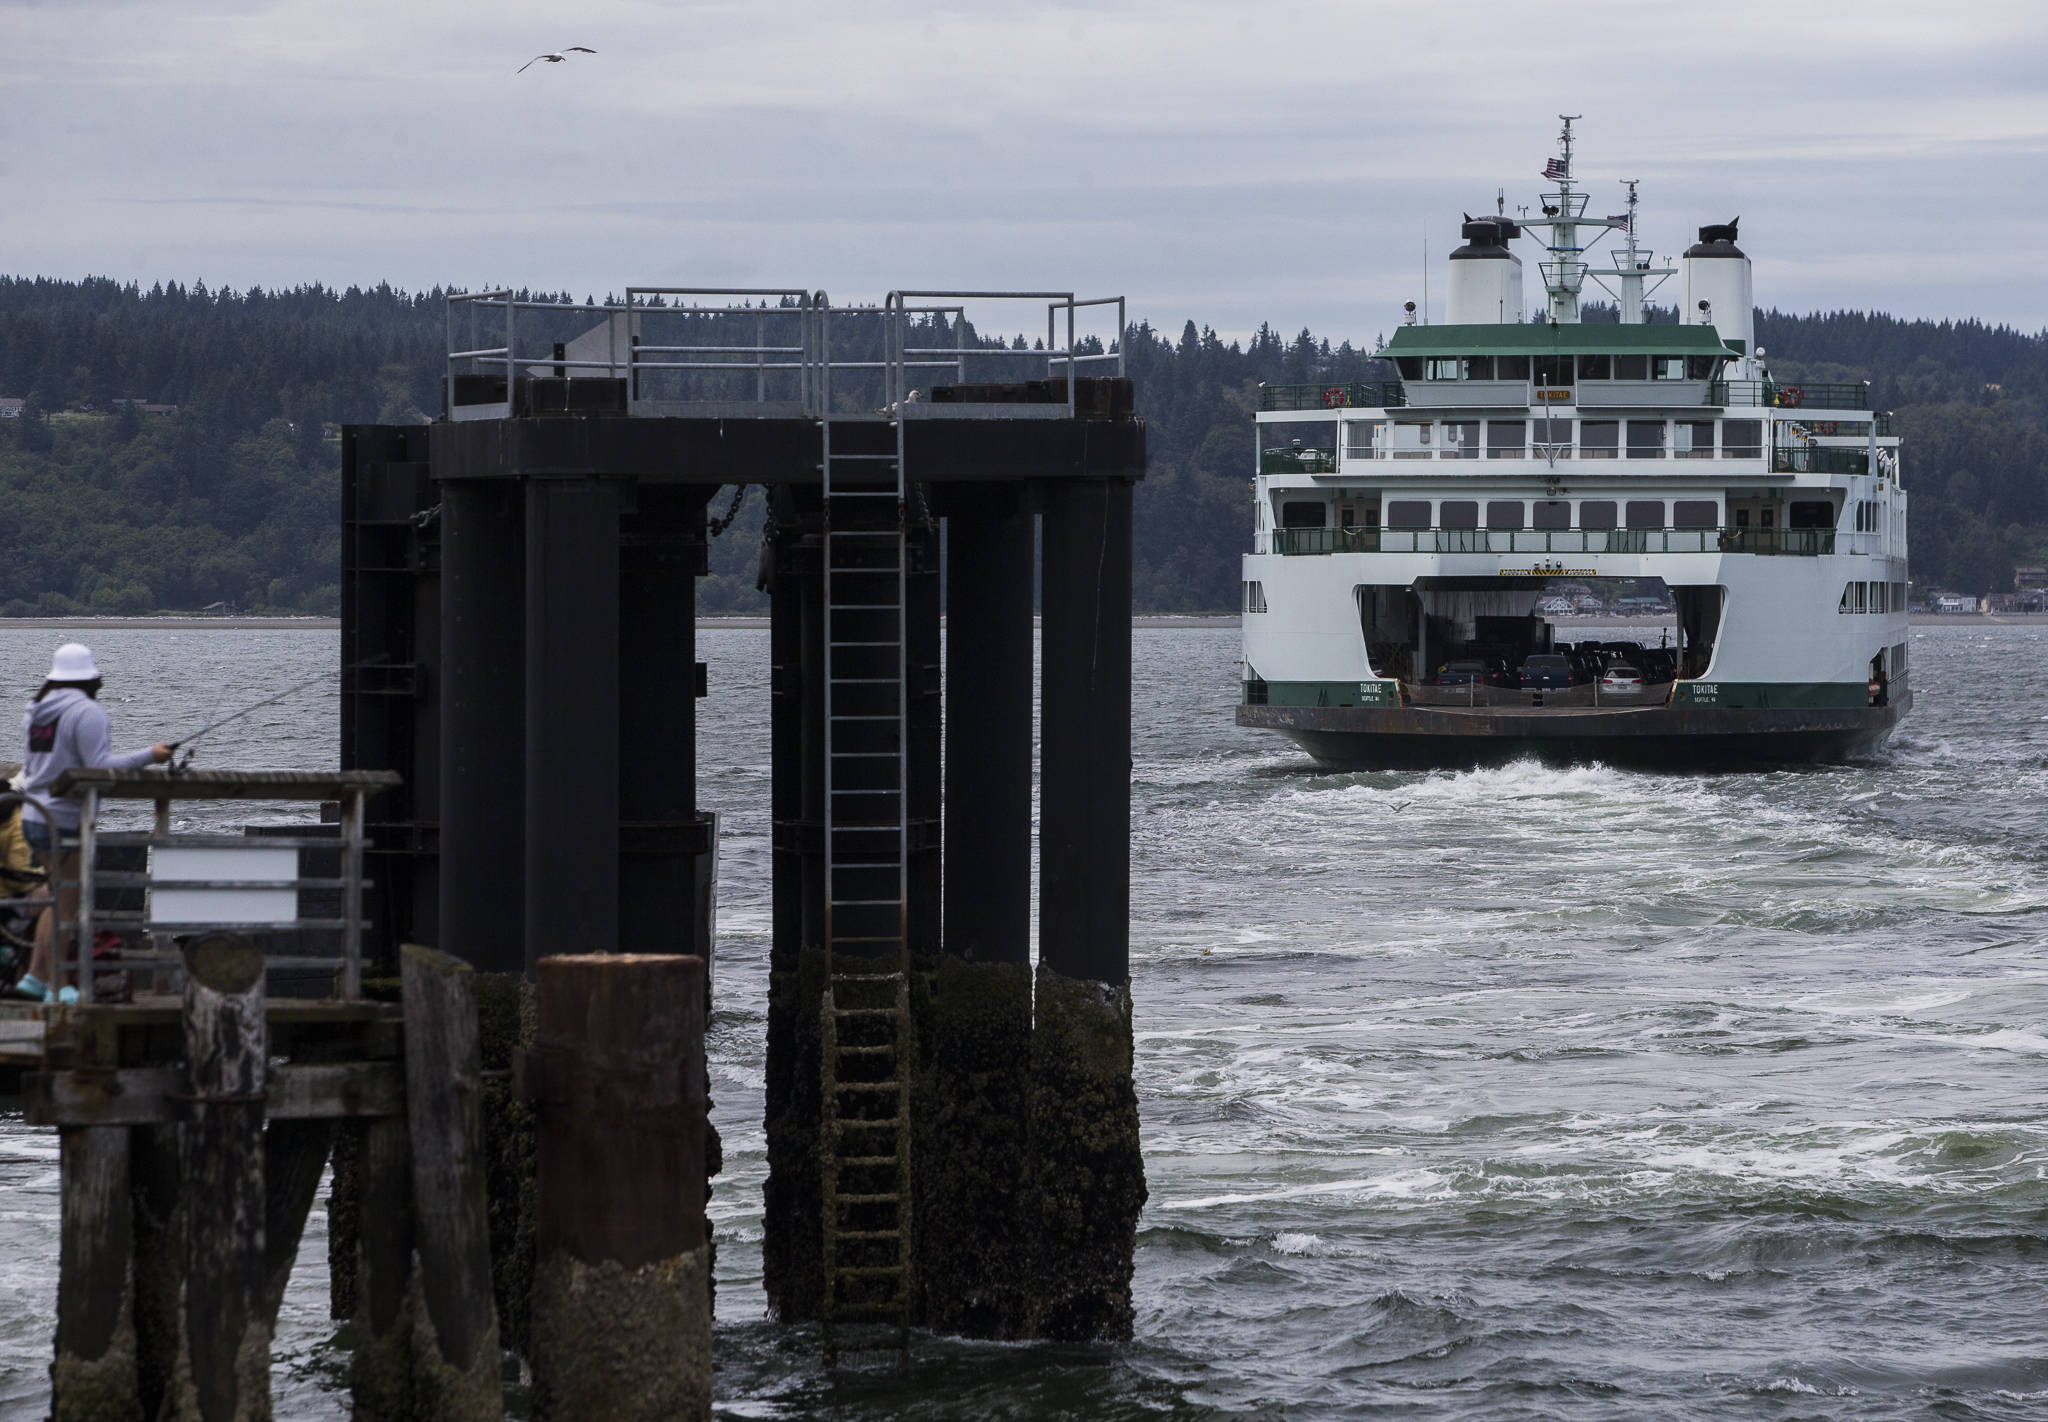 A full ferry pulls away from the dock in Mukilteo on June 26. (Olivia Vanni / The Herald)